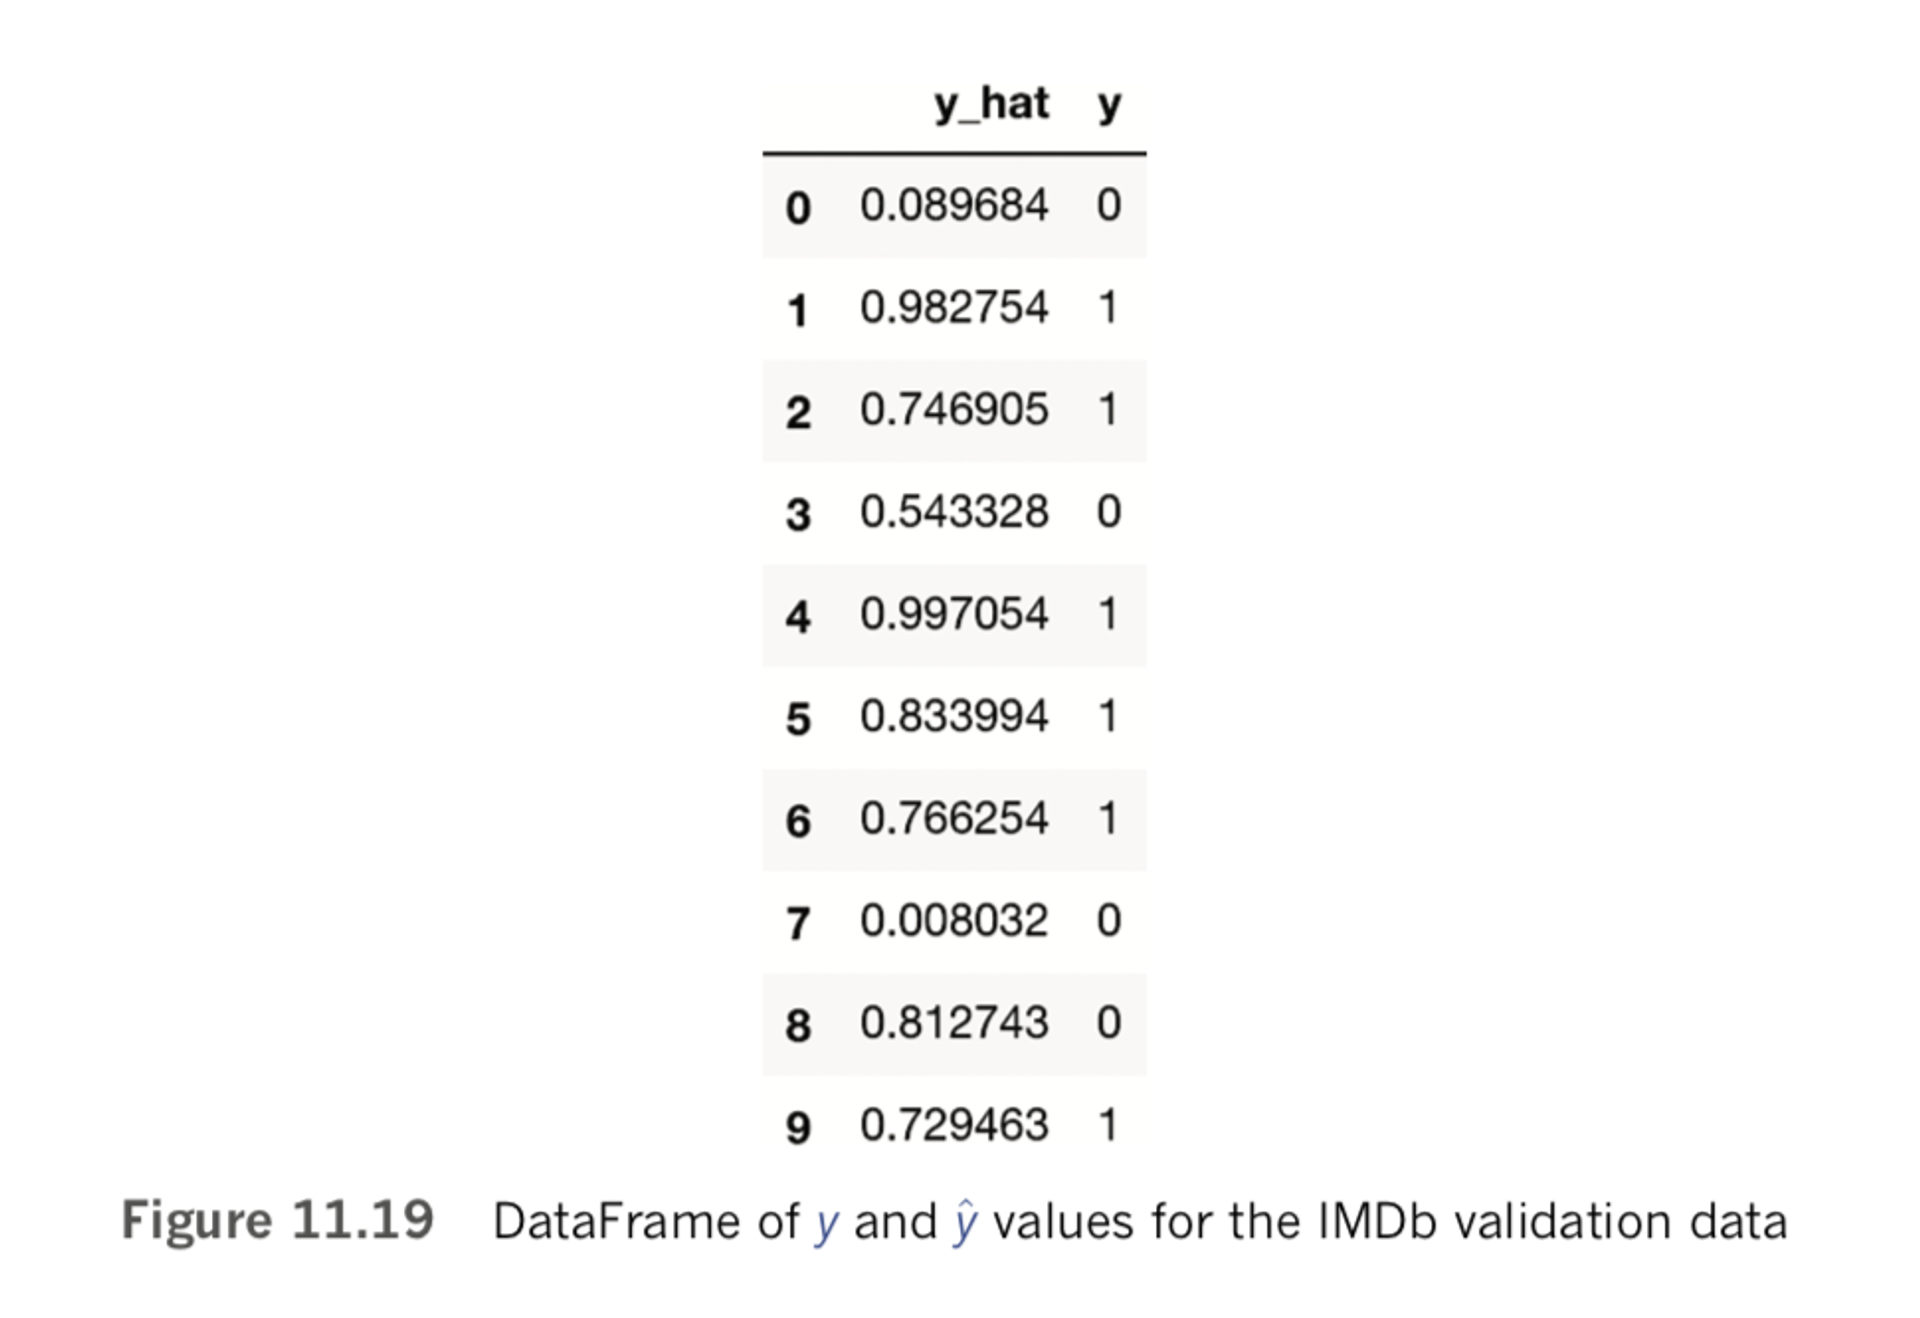 DataFrame of y and y values for the IMDb validation data